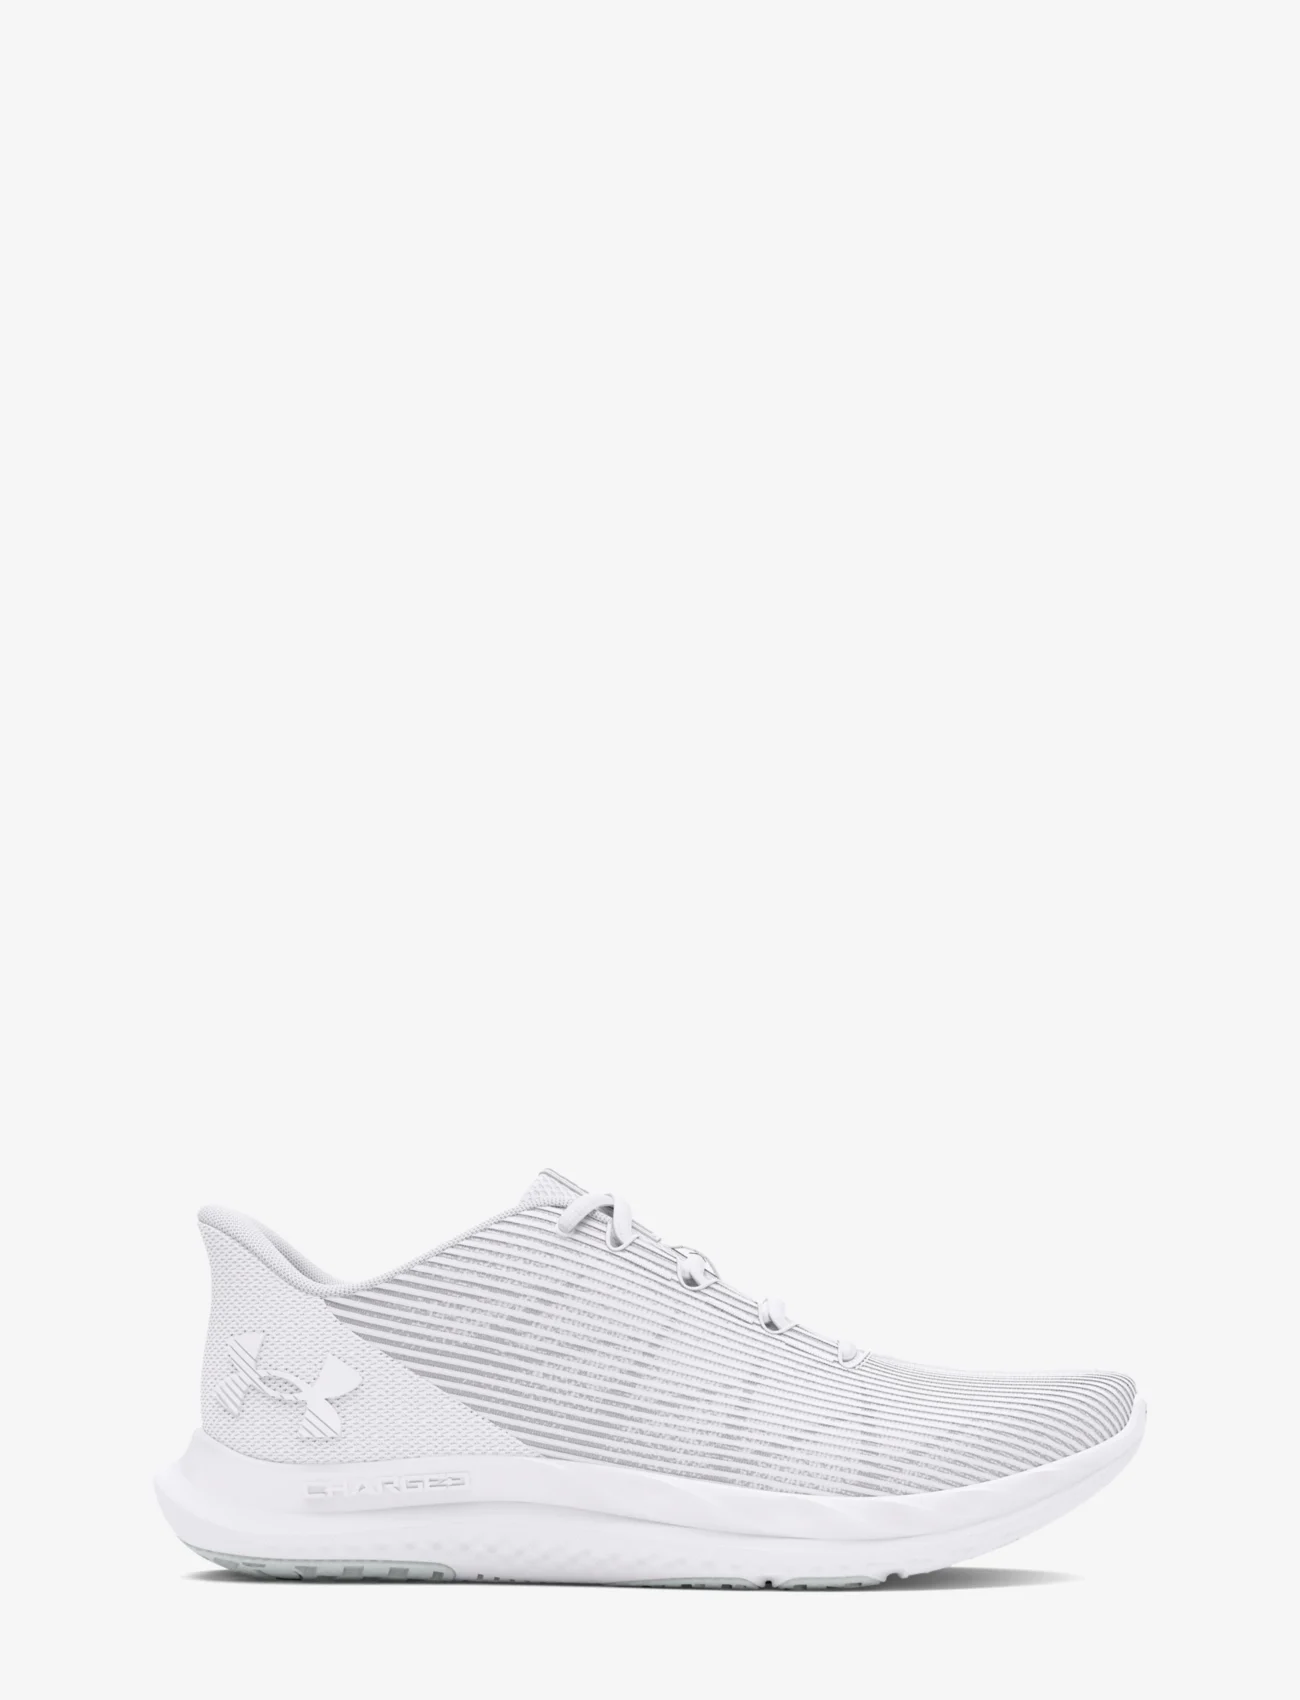 Under Armour - UA Charged Speed Swift - trainingsschuhe - white - 1